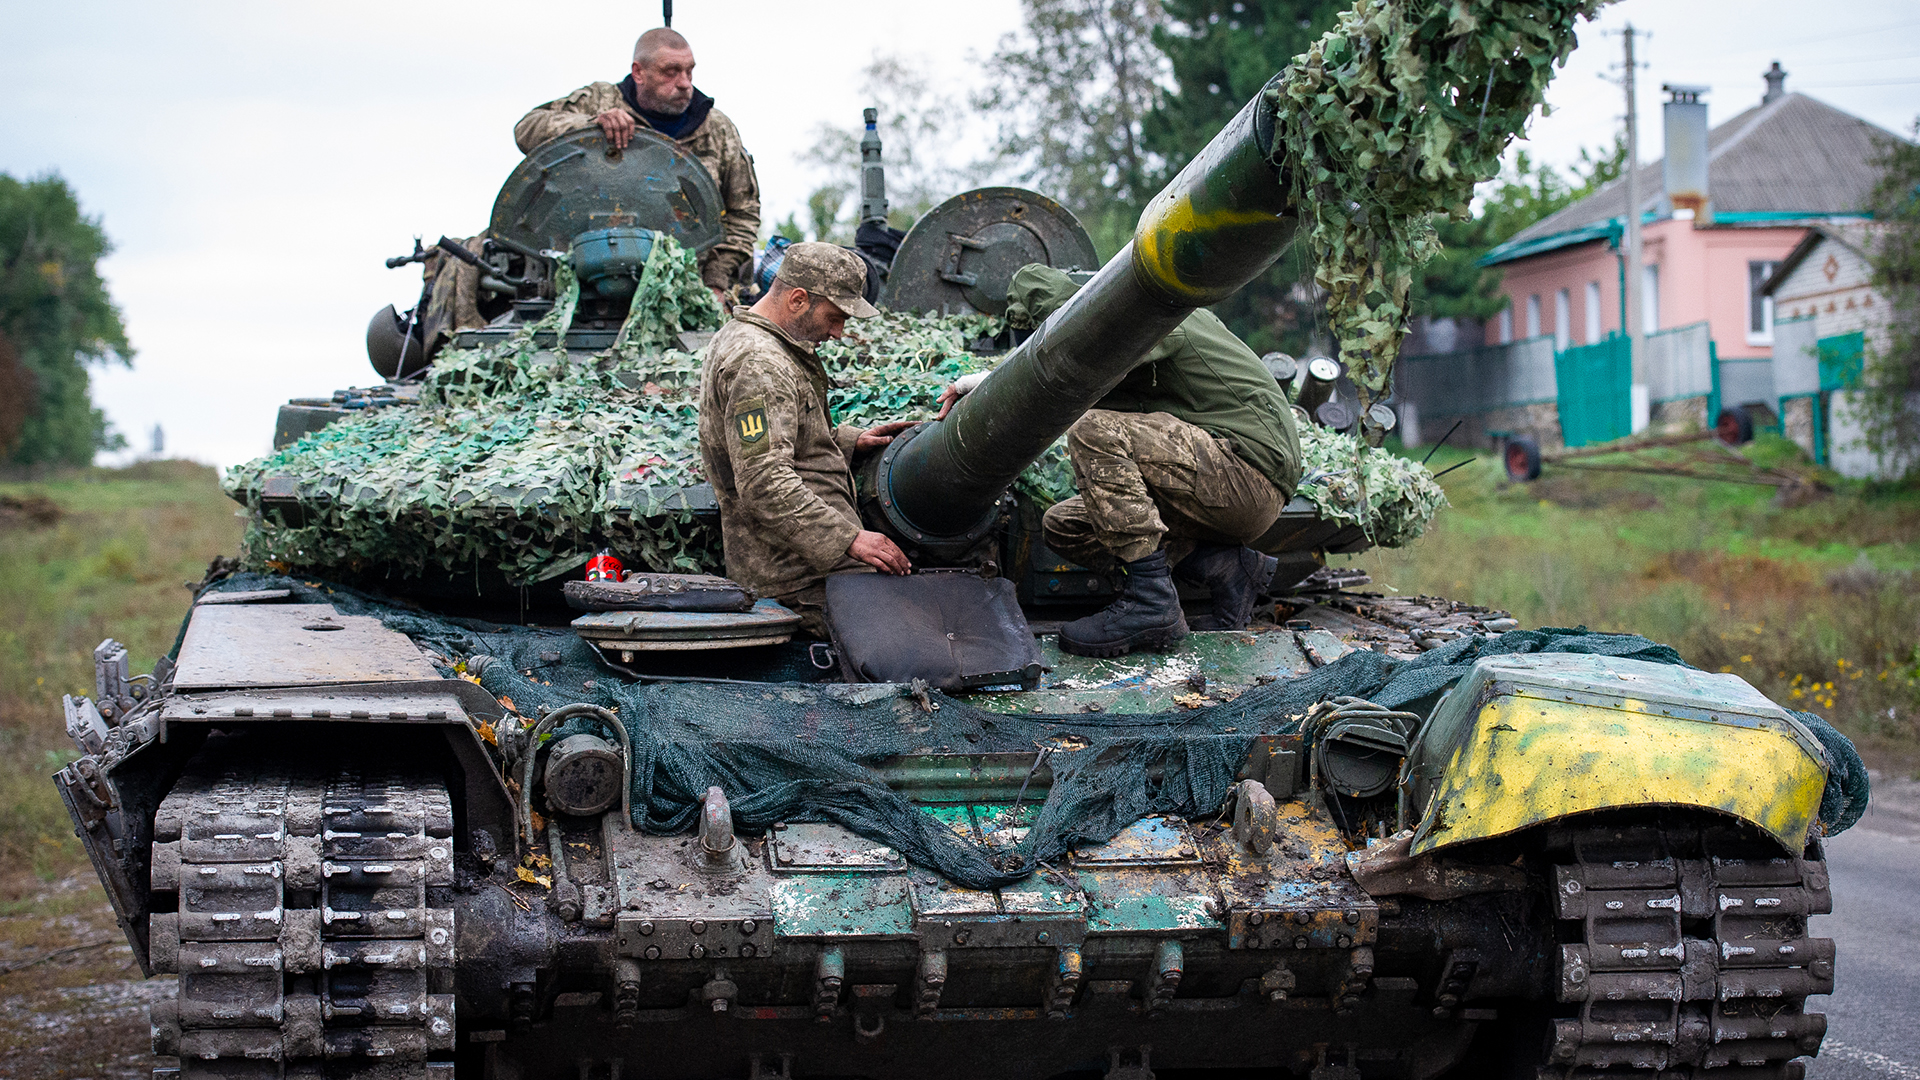 Ukraine is using its old tanks as artillery amid trench warfare in Bakhmut